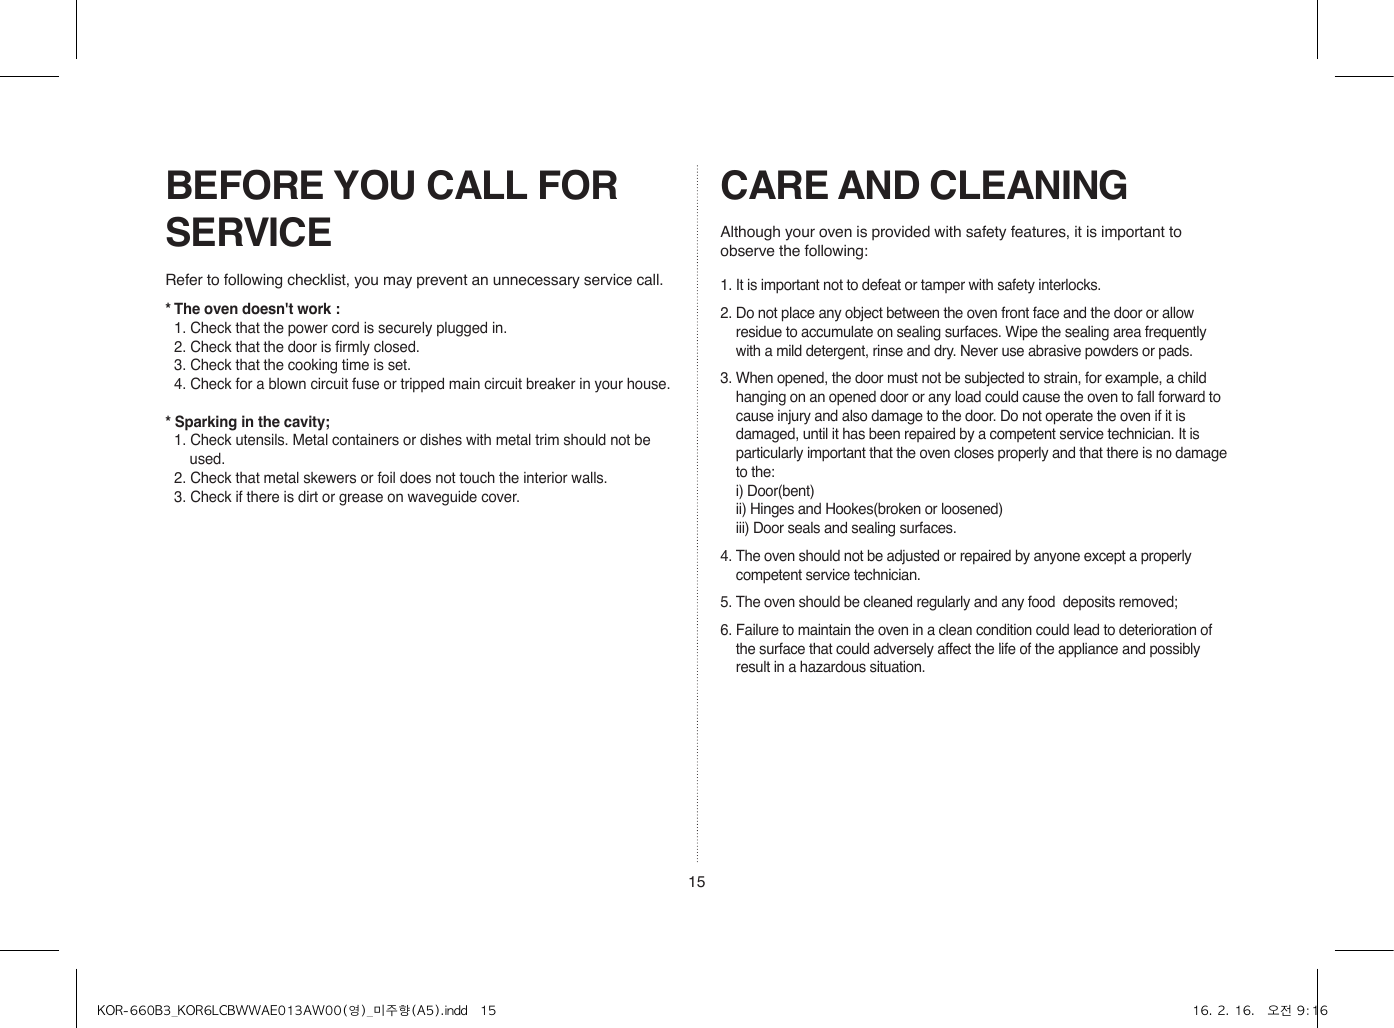 15BEFORE YOU CALL FOR SERVICECARE AND CLEANING1. It is important not to defeat or tamper with safety interlocks.2. Do not place any object between the oven front face and the door or allow residue to accumulate on sealing surfaces. Wipe the sealing area frequently with a mild detergent, rinse and dry. Never use abrasive powders or pads.3. When opened, the door must not be subjected to strain, for example, a child hanging on an opened door or any load could cause the oven to fall forward to cause injury and also damage to the door. Do not operate the oven if it is damaged, until it has been repaired by a competent service technician. It is particularly important that the oven closes properly and that there is no damage to the:  i) Door(bent)  ii) Hinges and Hookes(broken or loosened)  iii) Door seals and sealing surfaces.4. The oven should not be adjusted or repaired by anyone except a properly competent service technician.5. The oven should be cleaned regularly and any food  deposits removed;6. Failure to maintain the oven in a clean condition could lead to deterioration of the surface that could adversely affect the life of the appliance and possibly result in a hazardous situation.Refer to following checklist, you may prevent an unnecessary service call.Although your oven is provided with safety features, it is important to observe the following:* The oven doesn&apos;t work :  1. Check that the power cord is securely plugged in.  2. Check that the door is firmly closed.  3. Check that the cooking time is set.  4. Check for a blown circuit fuse or tripped main circuit breaker in your house.* Sparking in the cavity;  1. Check utensils. Metal containers or dishes with metal trim should not be used.  2. Check that metal skewers or foil does not touch the interior walls.  3. Check if there is dirt or grease on waveguide cover.KOR-660B3_KOR6LCBWWAE013AW00(영)_미주향(A5).indd   15 16. 2. 16.   오전 9:16